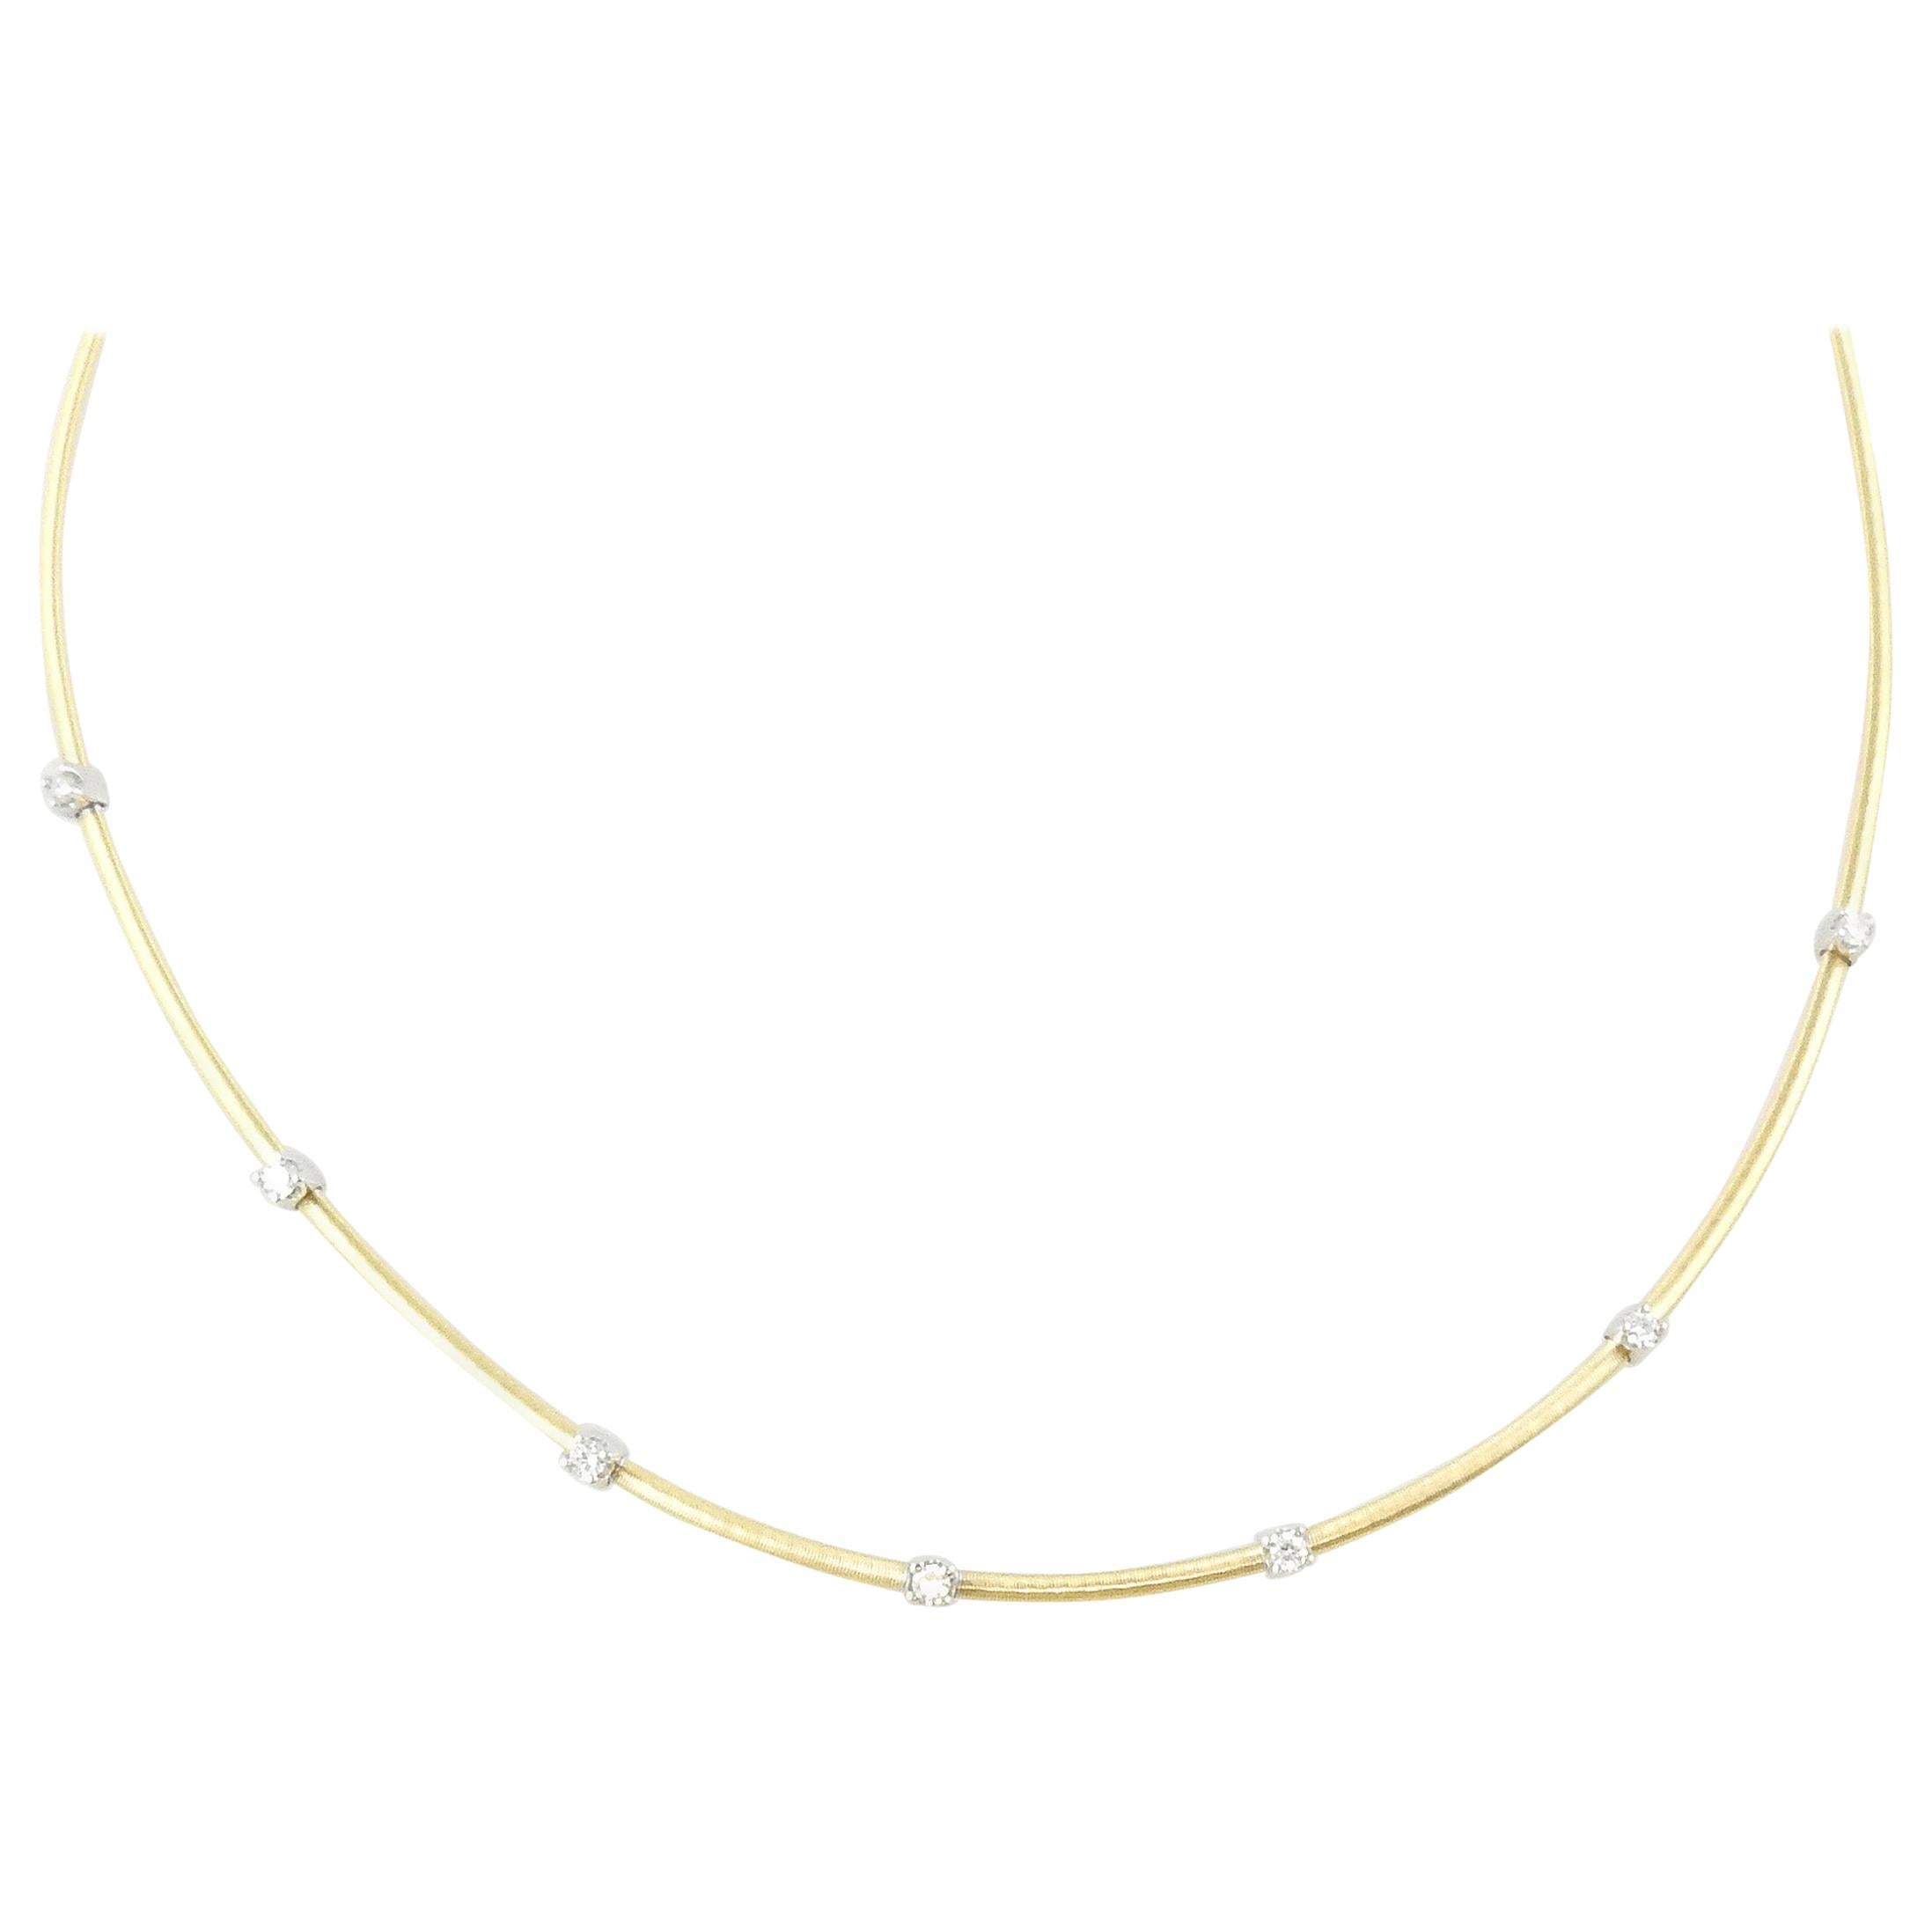 Marco Bicego 18k Yellow and White Gold Diamond 7 Station Necklace